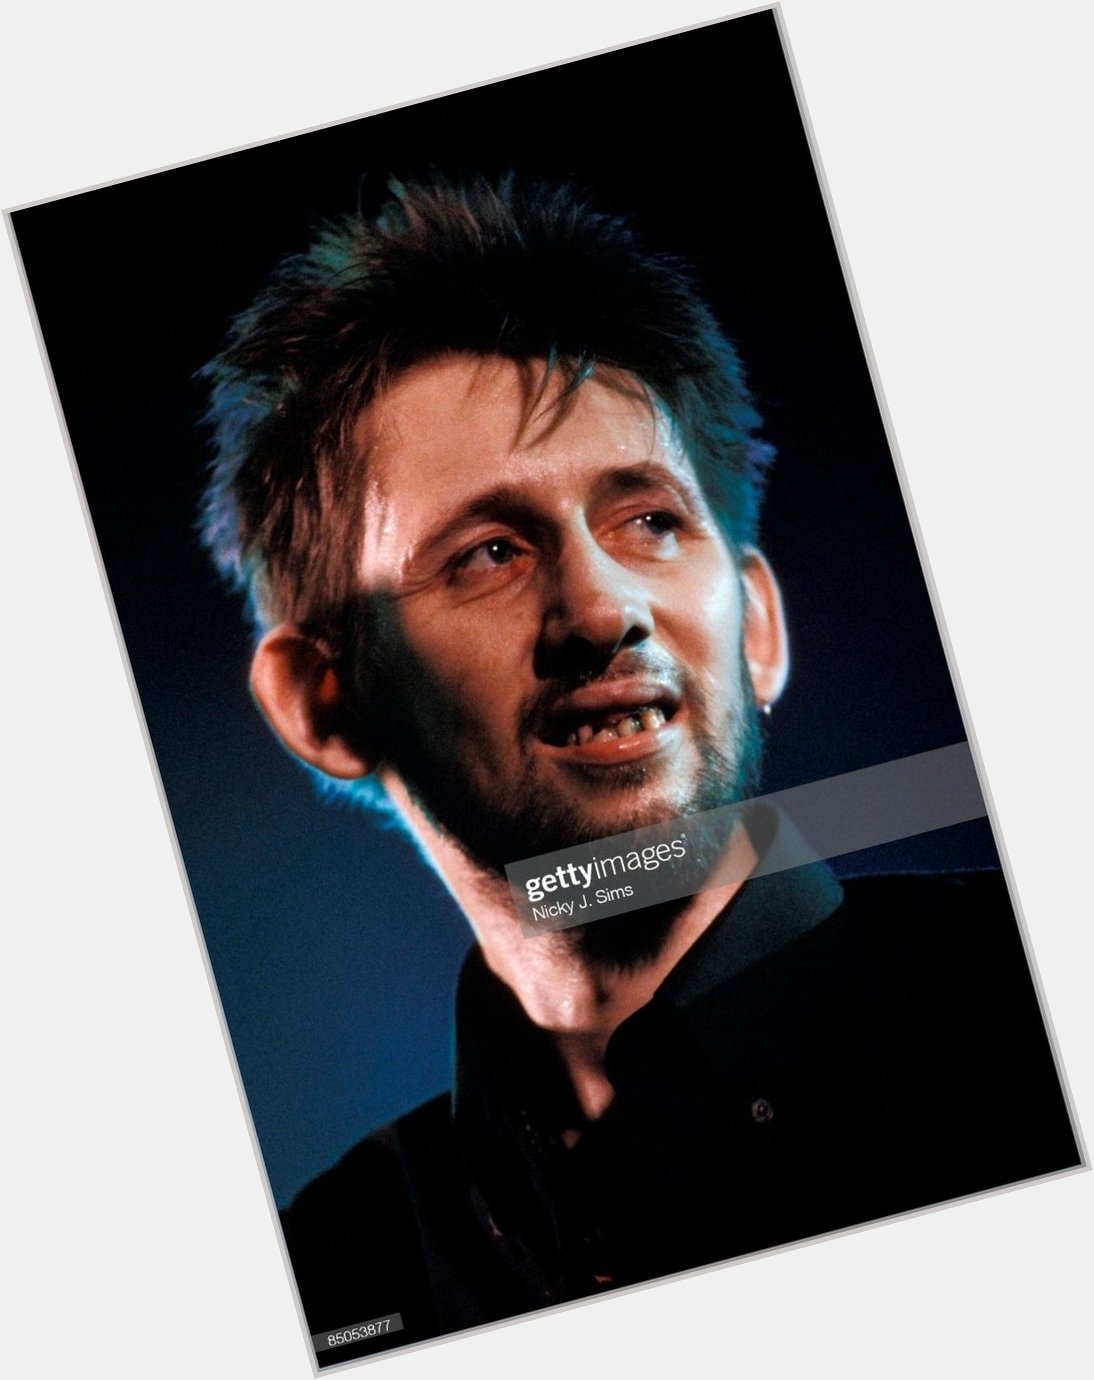 Happy birthday to the High King of Ireland, the living legend that is Shane MacGowan. 